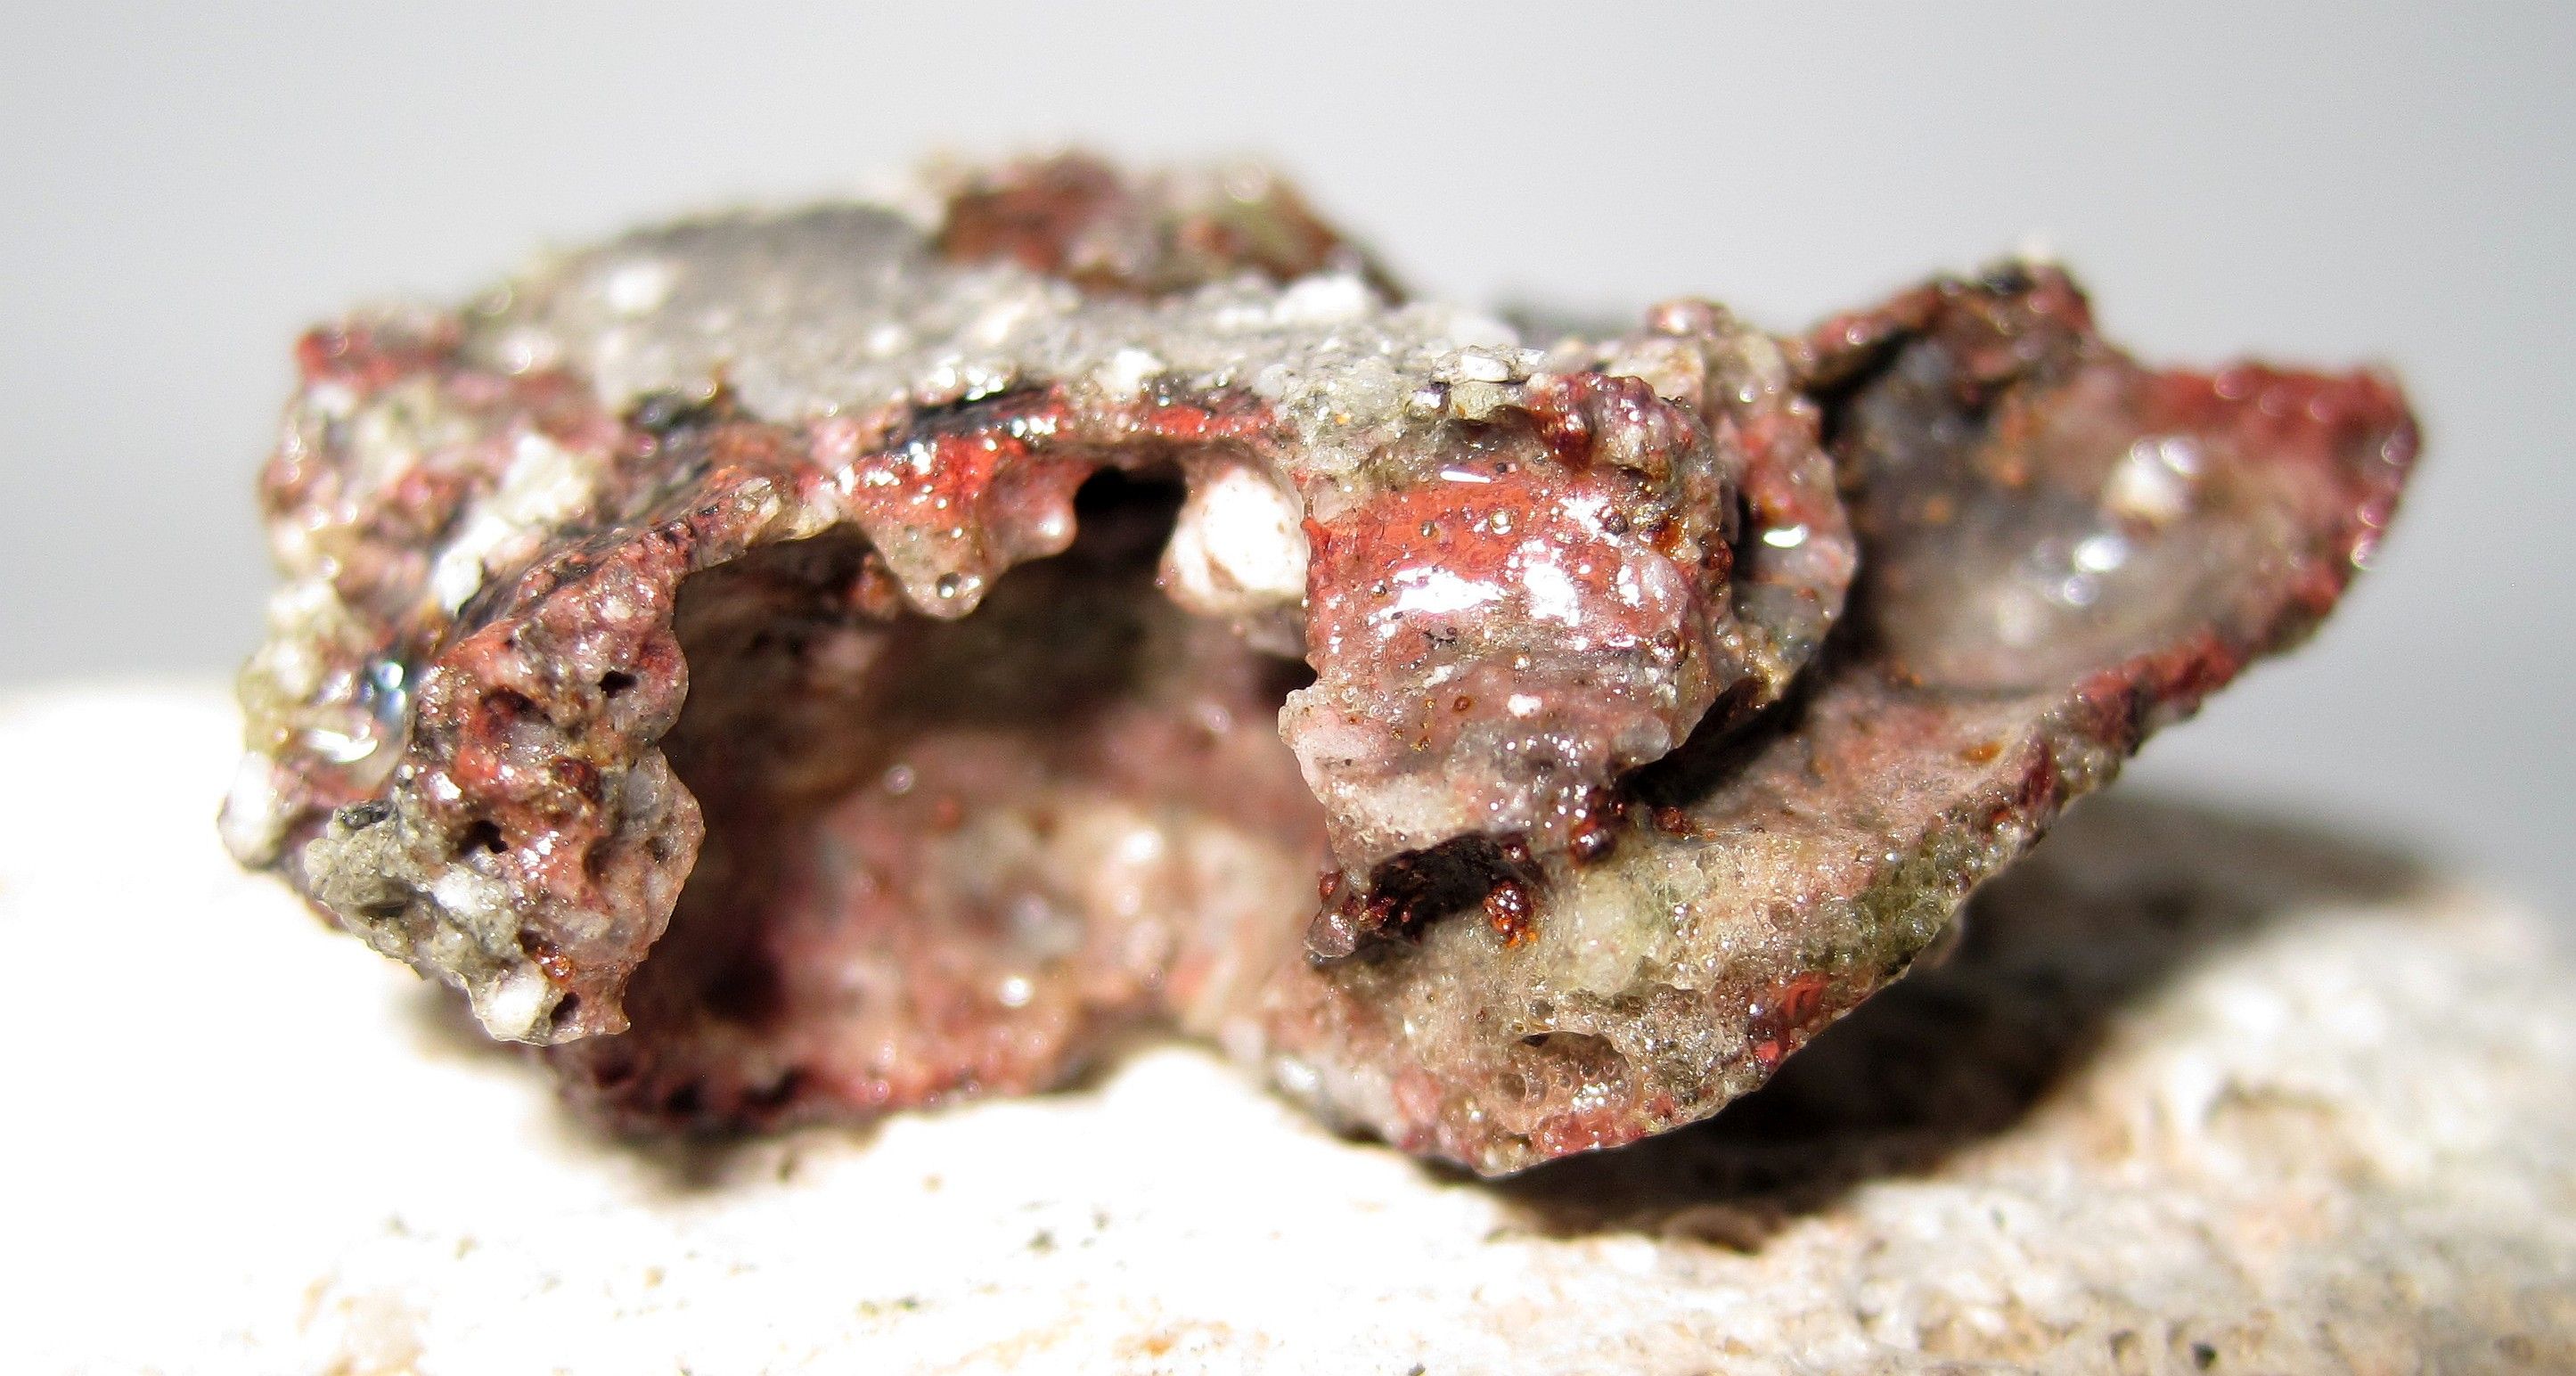 Red Trinitite hell yeh